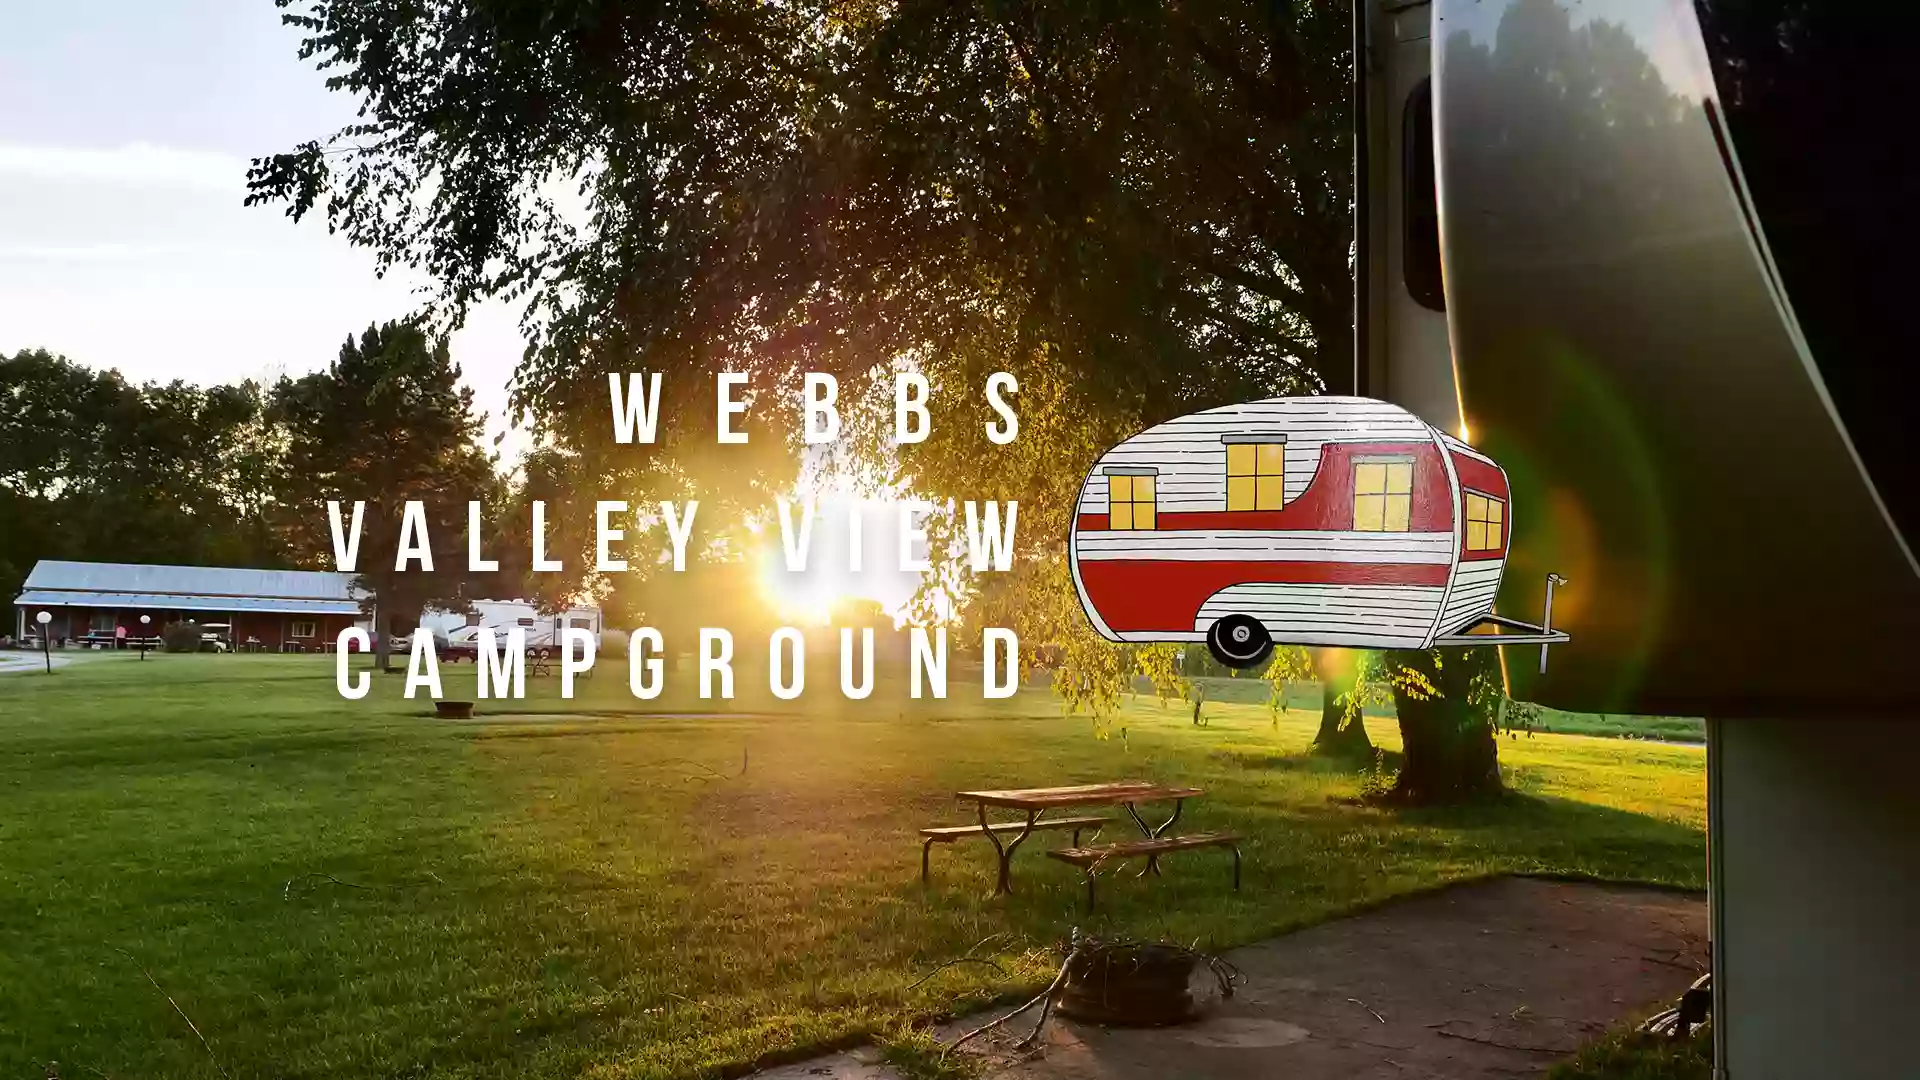 Webb's Valley View Campground